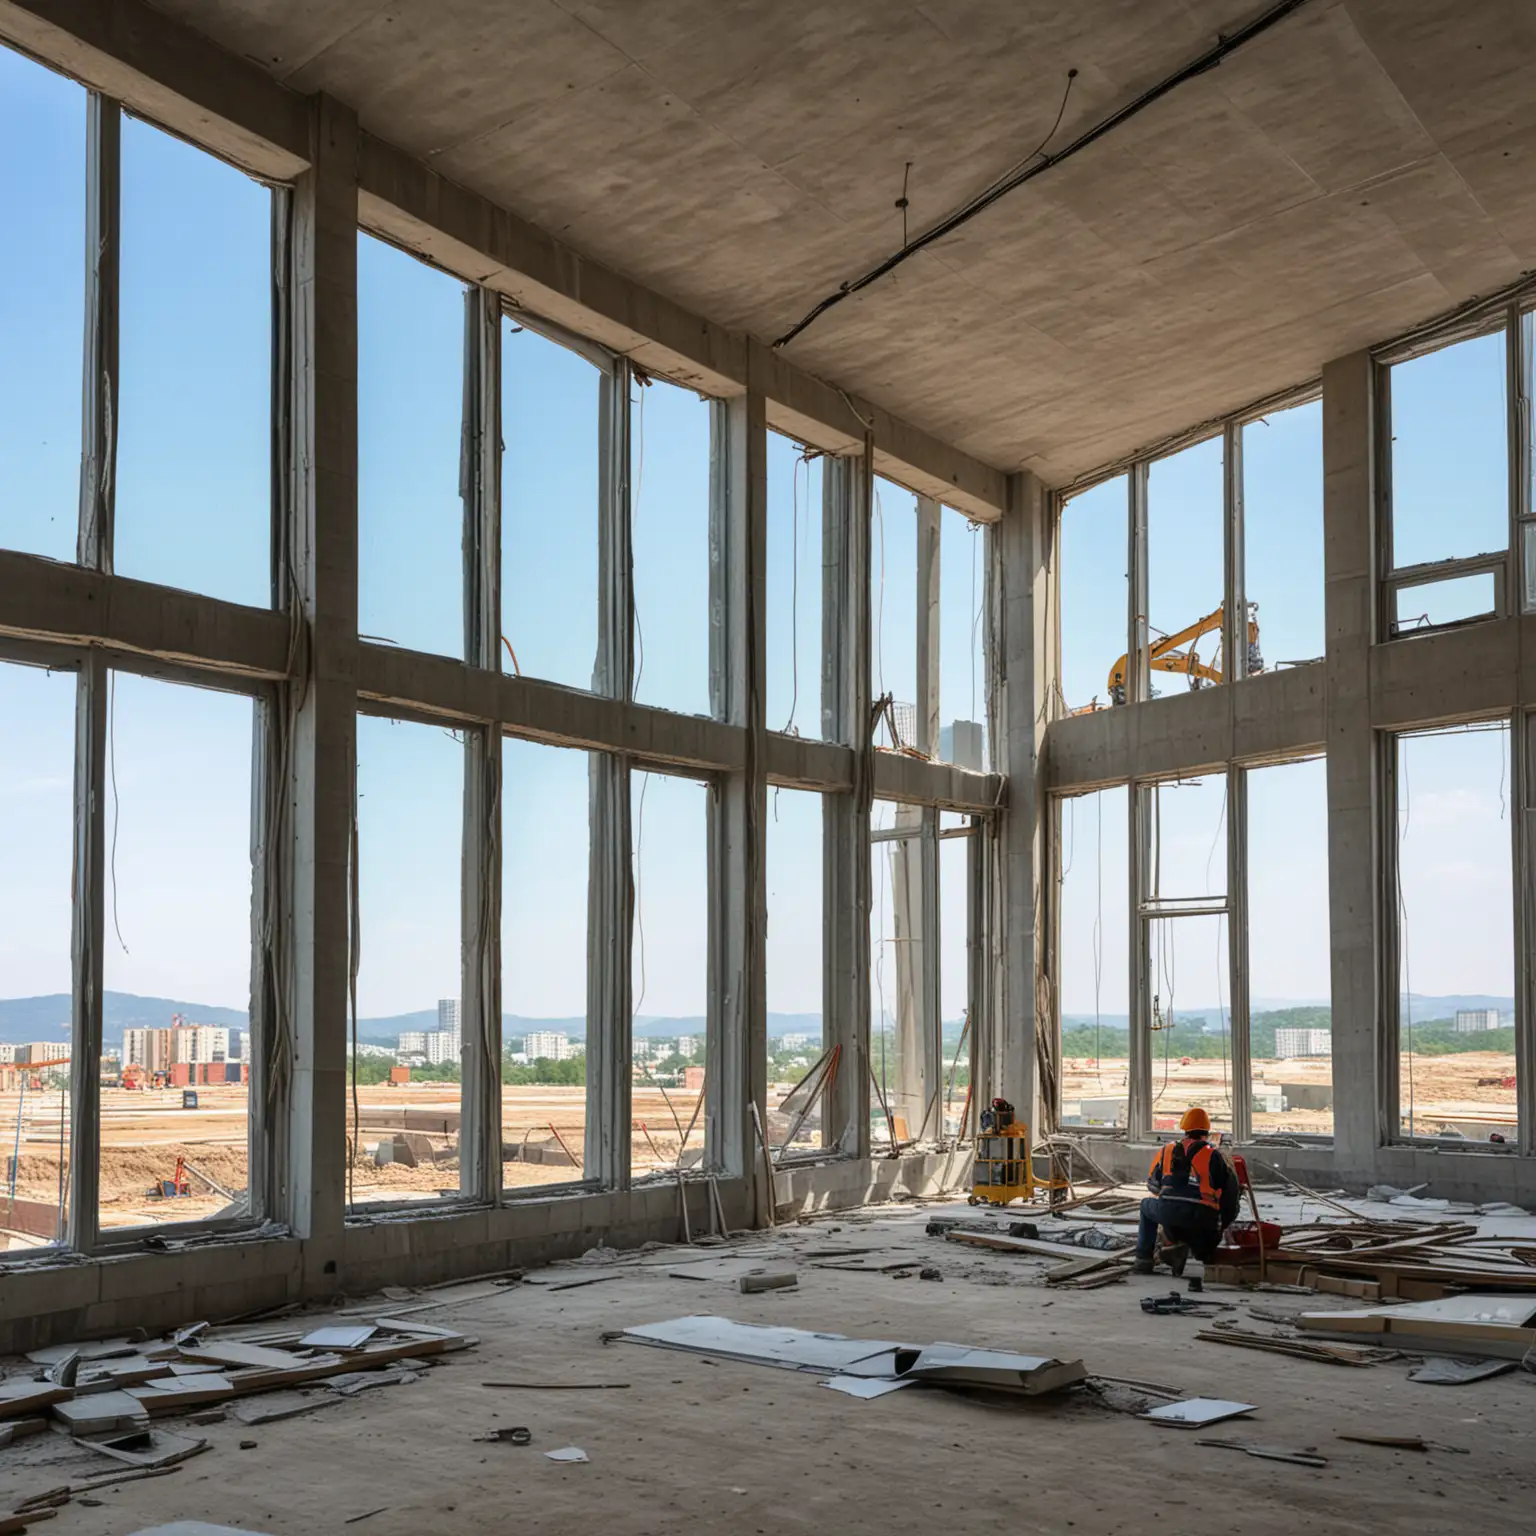 Inside modern building under construction, engineers working in background, blue sky through windows